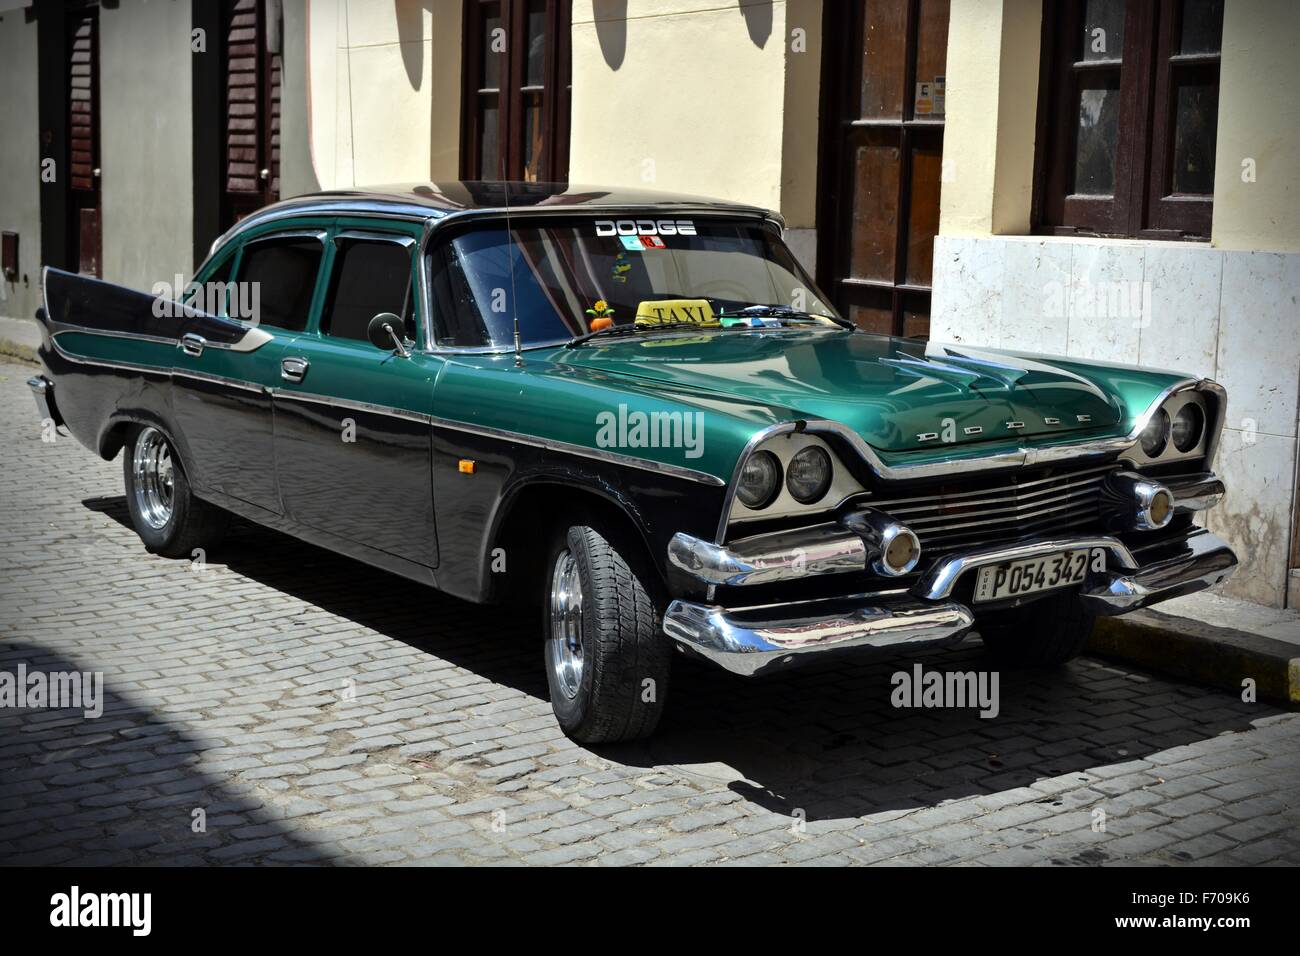 shiny metallic green and black vintage dodge taxi with tail fins parked on a sunny cobbled street in Trinidad Cuba Stock Photo